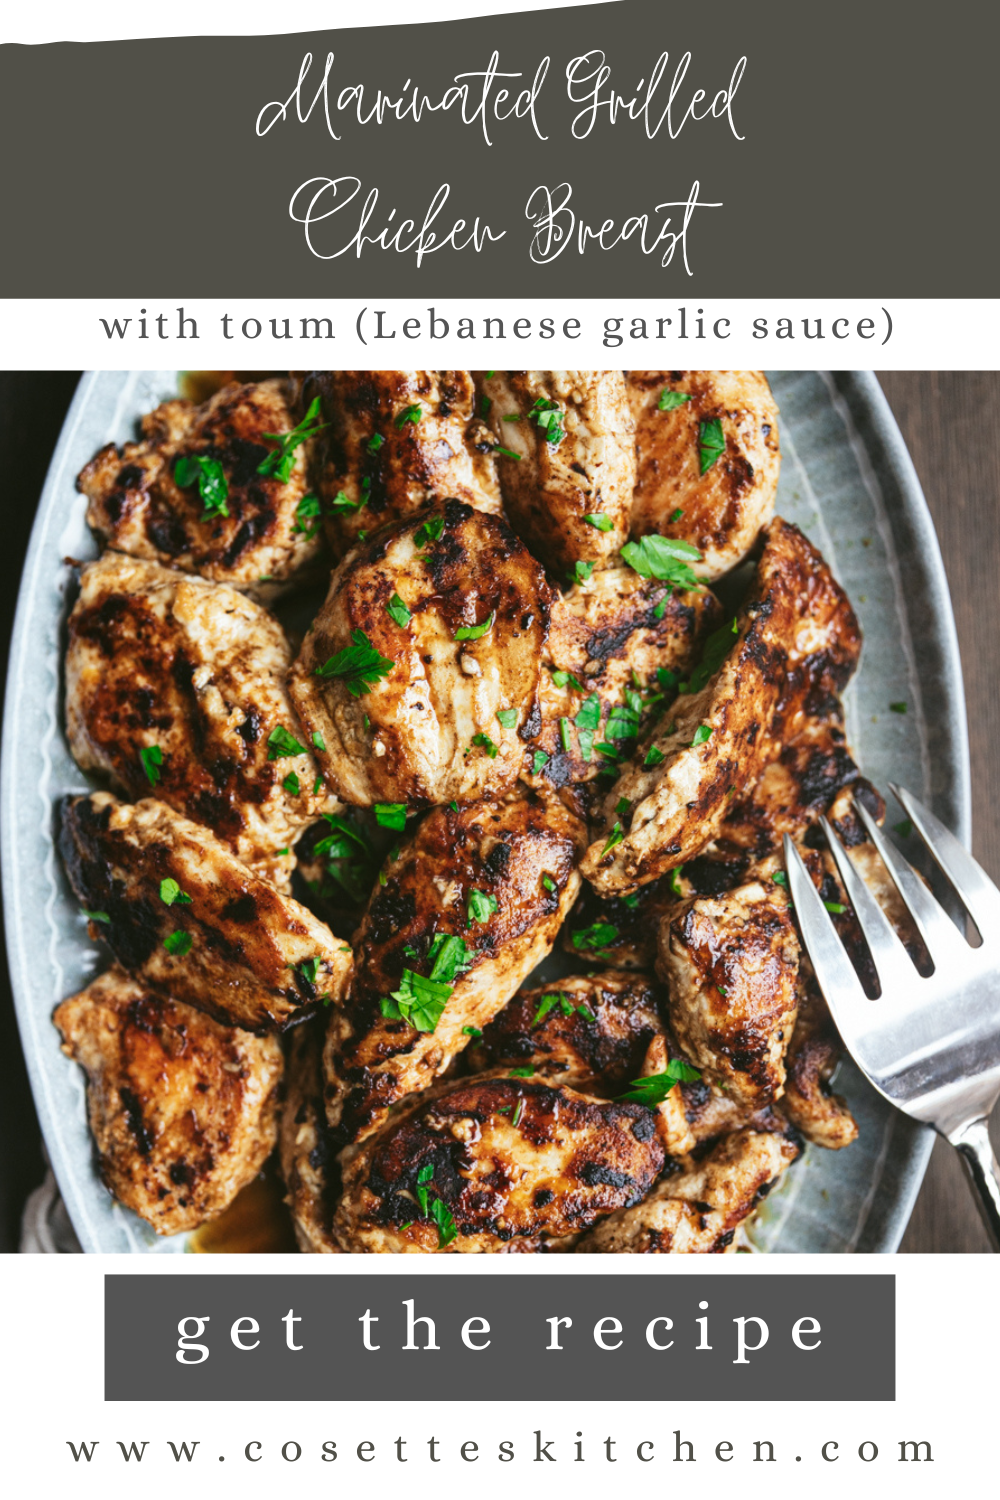 Image of grilled chicken with text, use to pin for later